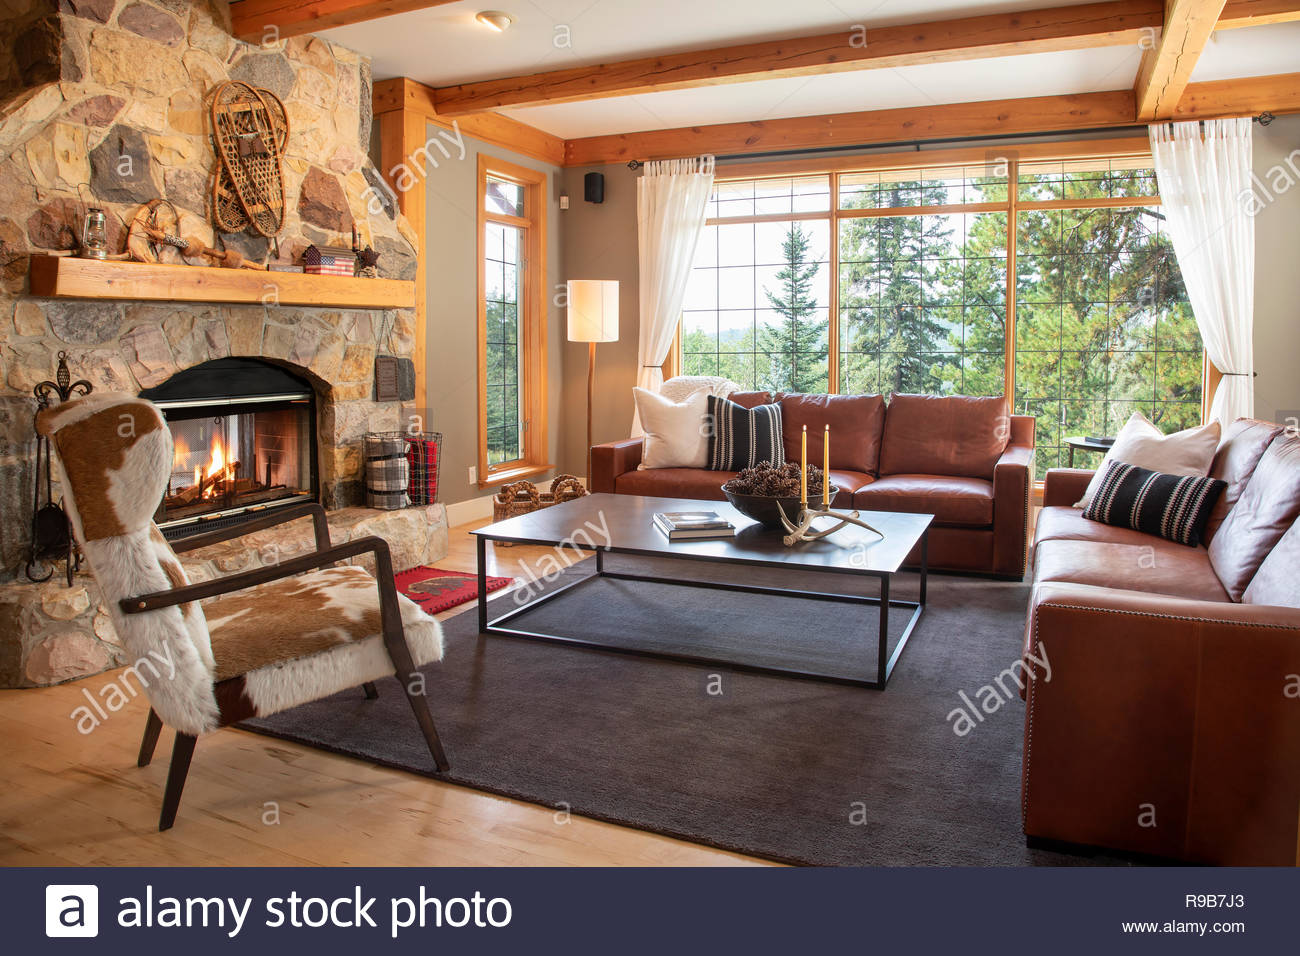 Home showcase interior living room with leather sofas and stone fireplace Stock Photo